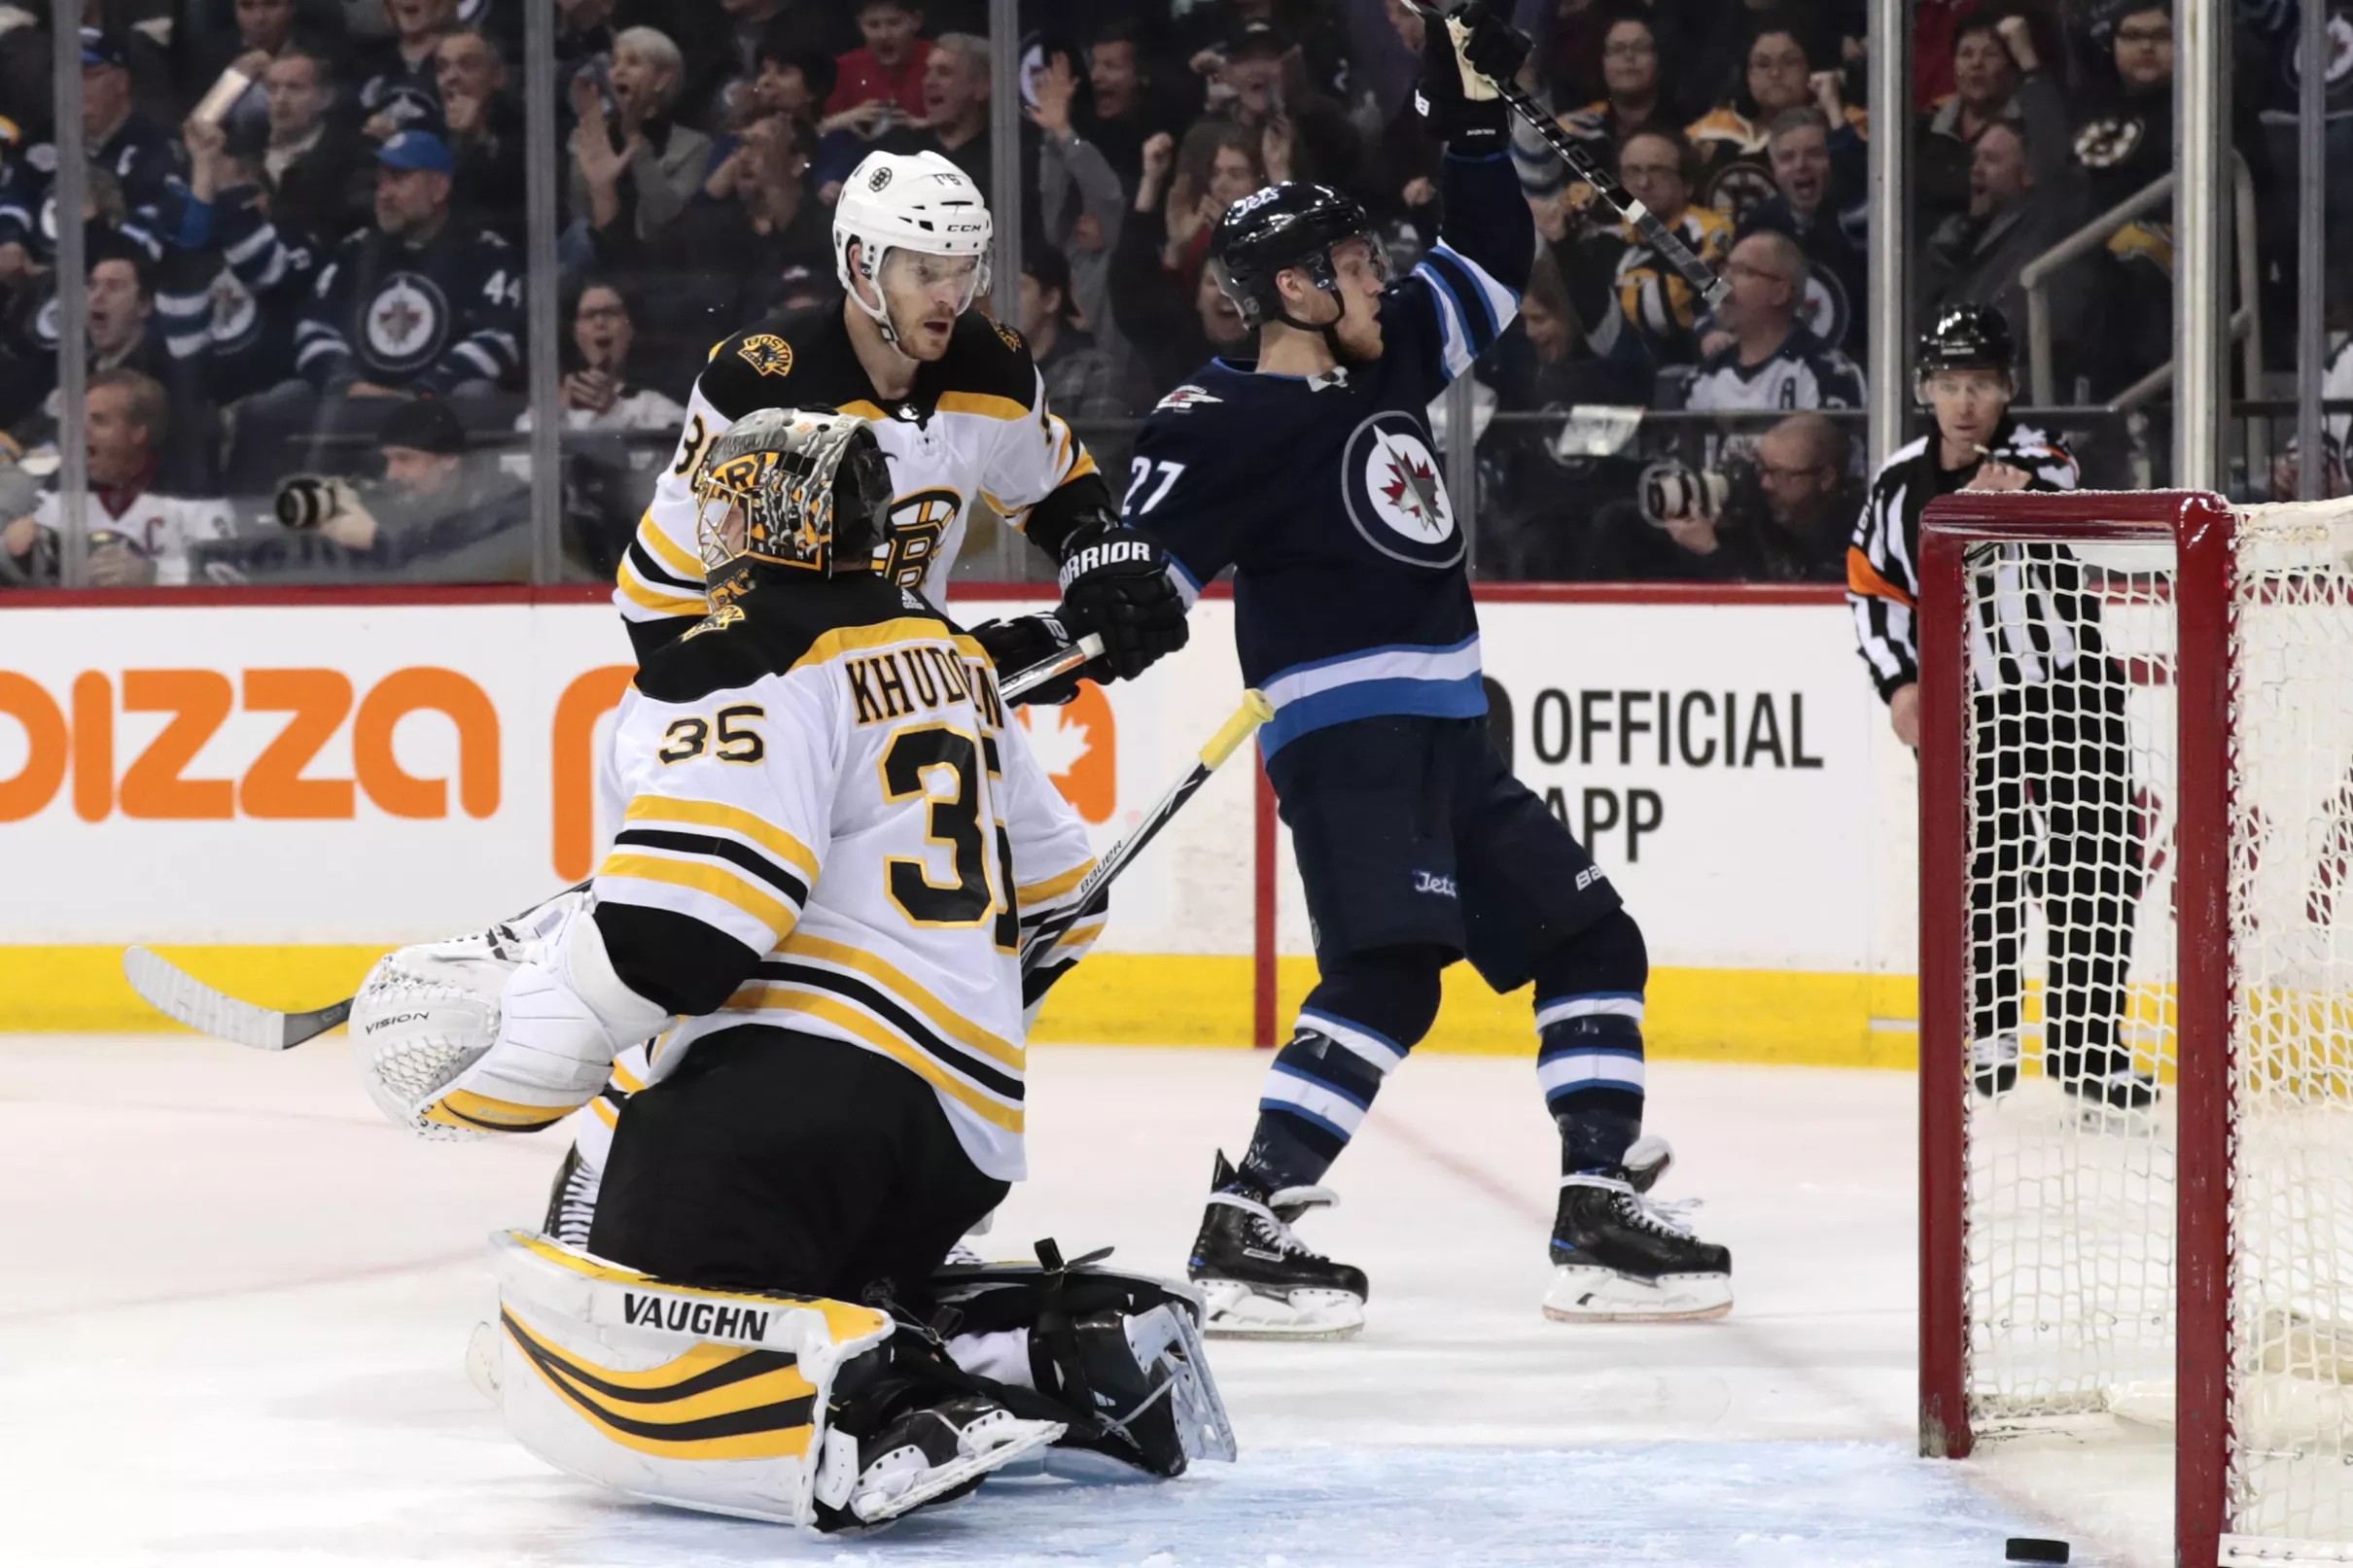 HIGHLIGHTS: Bruins fall to Jets in shootout after third period power ...